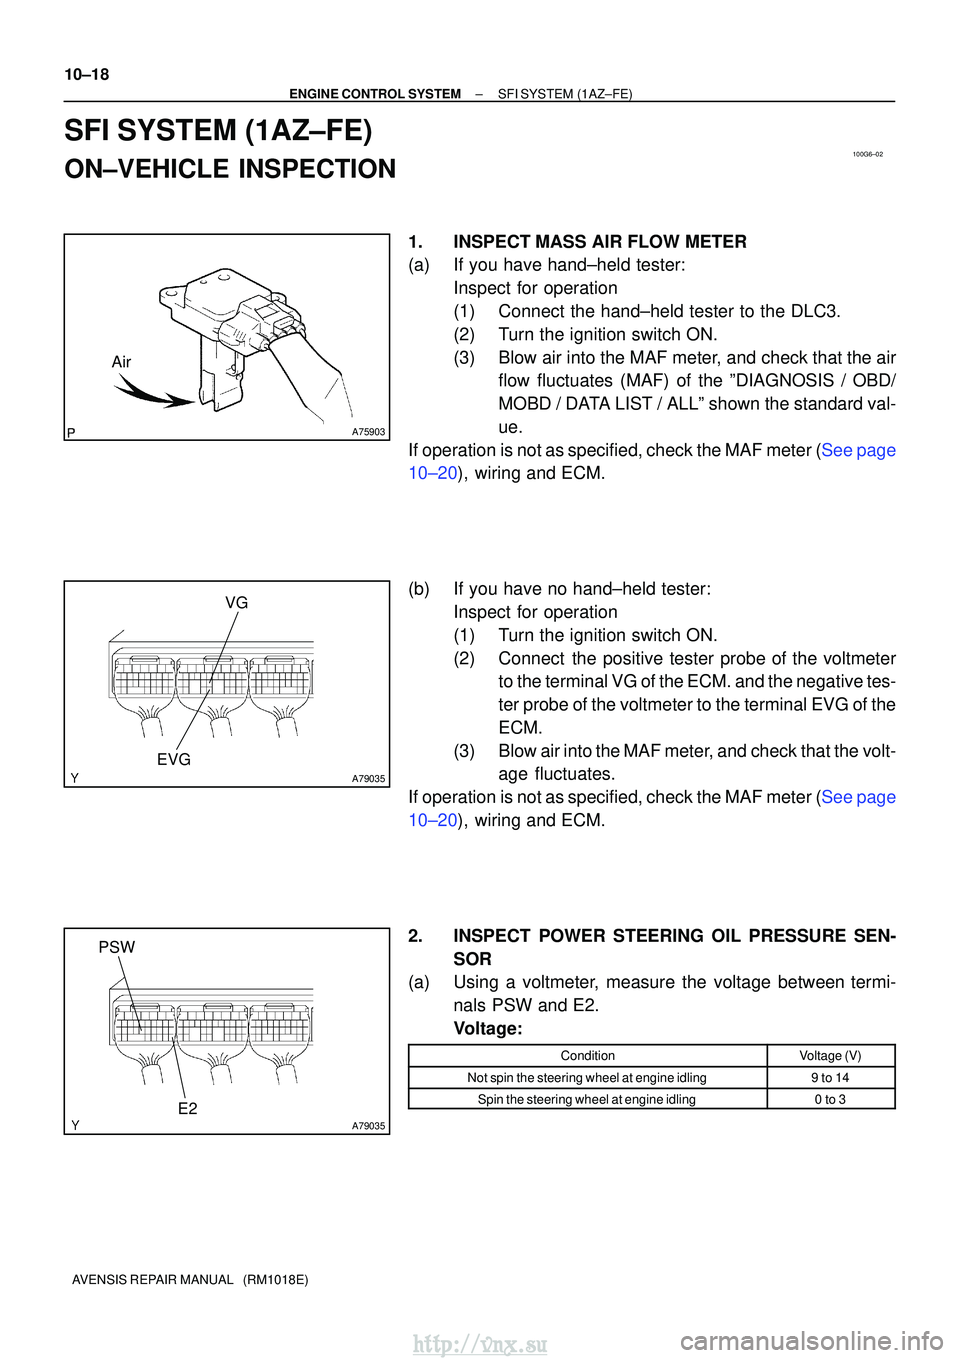 TOYOTA AVENSIS 2003  Service Repair Manual 100G6±02
A75903
Air
A79035
VG
EVG
A79035E2
PSW
10±18
±
ENGINE CONTROL SYSTEMSFI SYSTEM(1AZ±FE)
AVENSIS REPAIR MANUAL   (RM1018E)
SFI SYSTEM(1AZ±FE)
ON±VEHICLE INSPECTION
1.INSPECTMASS AIR FLOW M